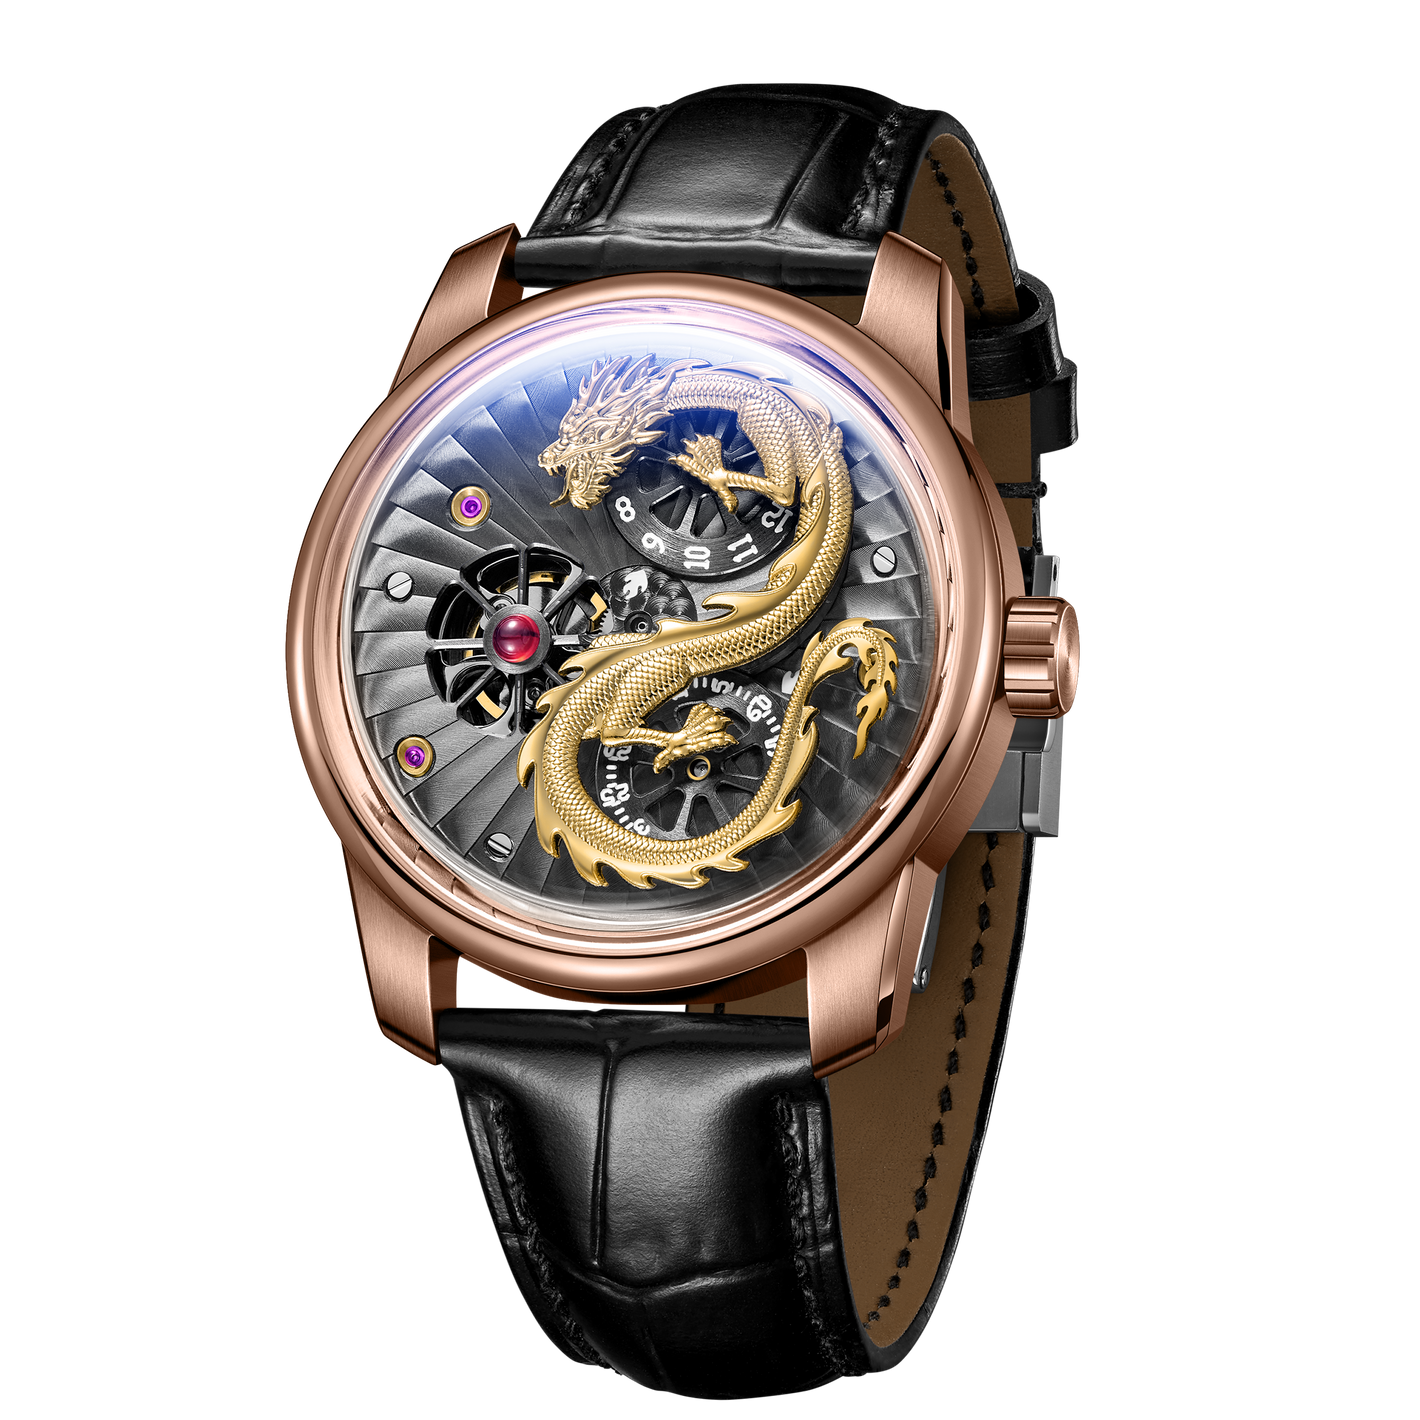 Affordable Automatic Rose Gold Chinese Dragon Skeleton Watches from JM Dragon Series